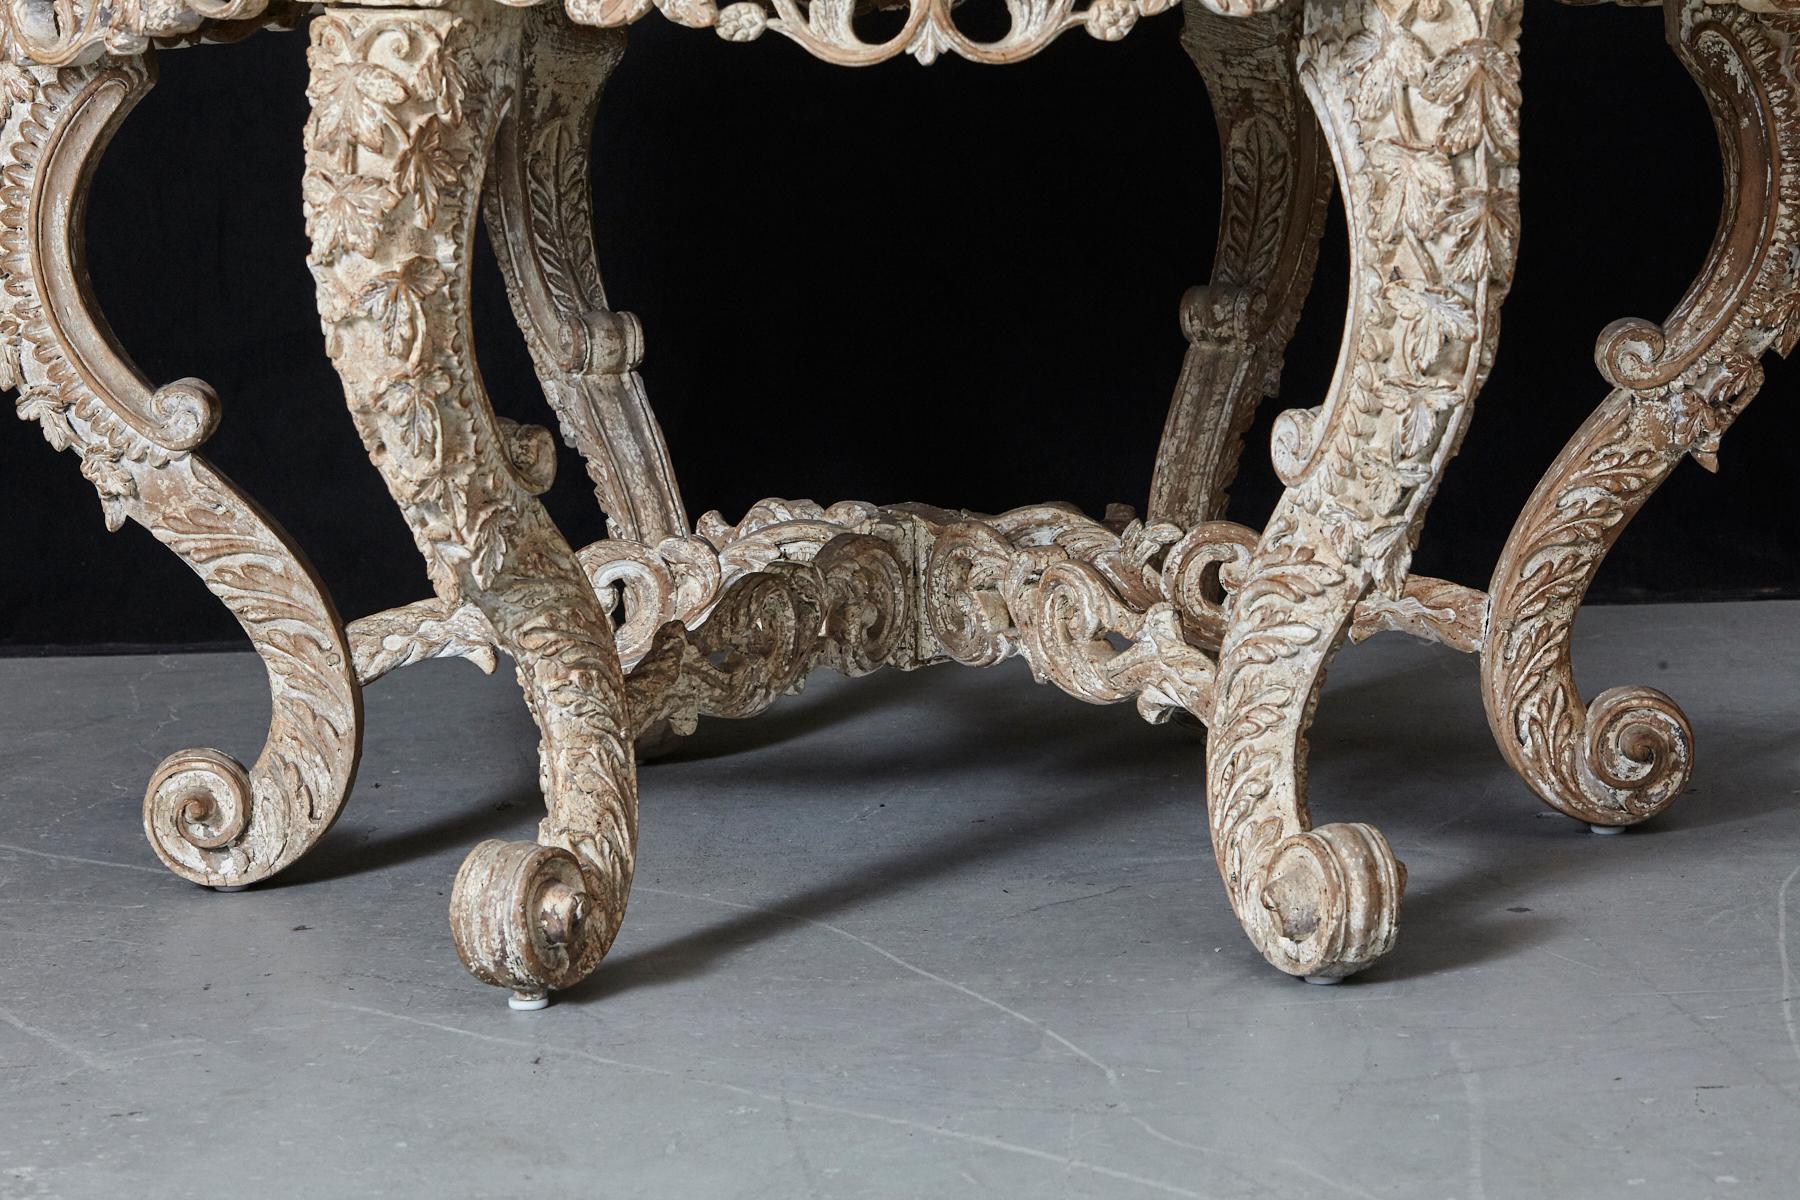 Hand-Carved British Colonial Victorian Carved and Painted Centre Table, circa 1870s For Sale